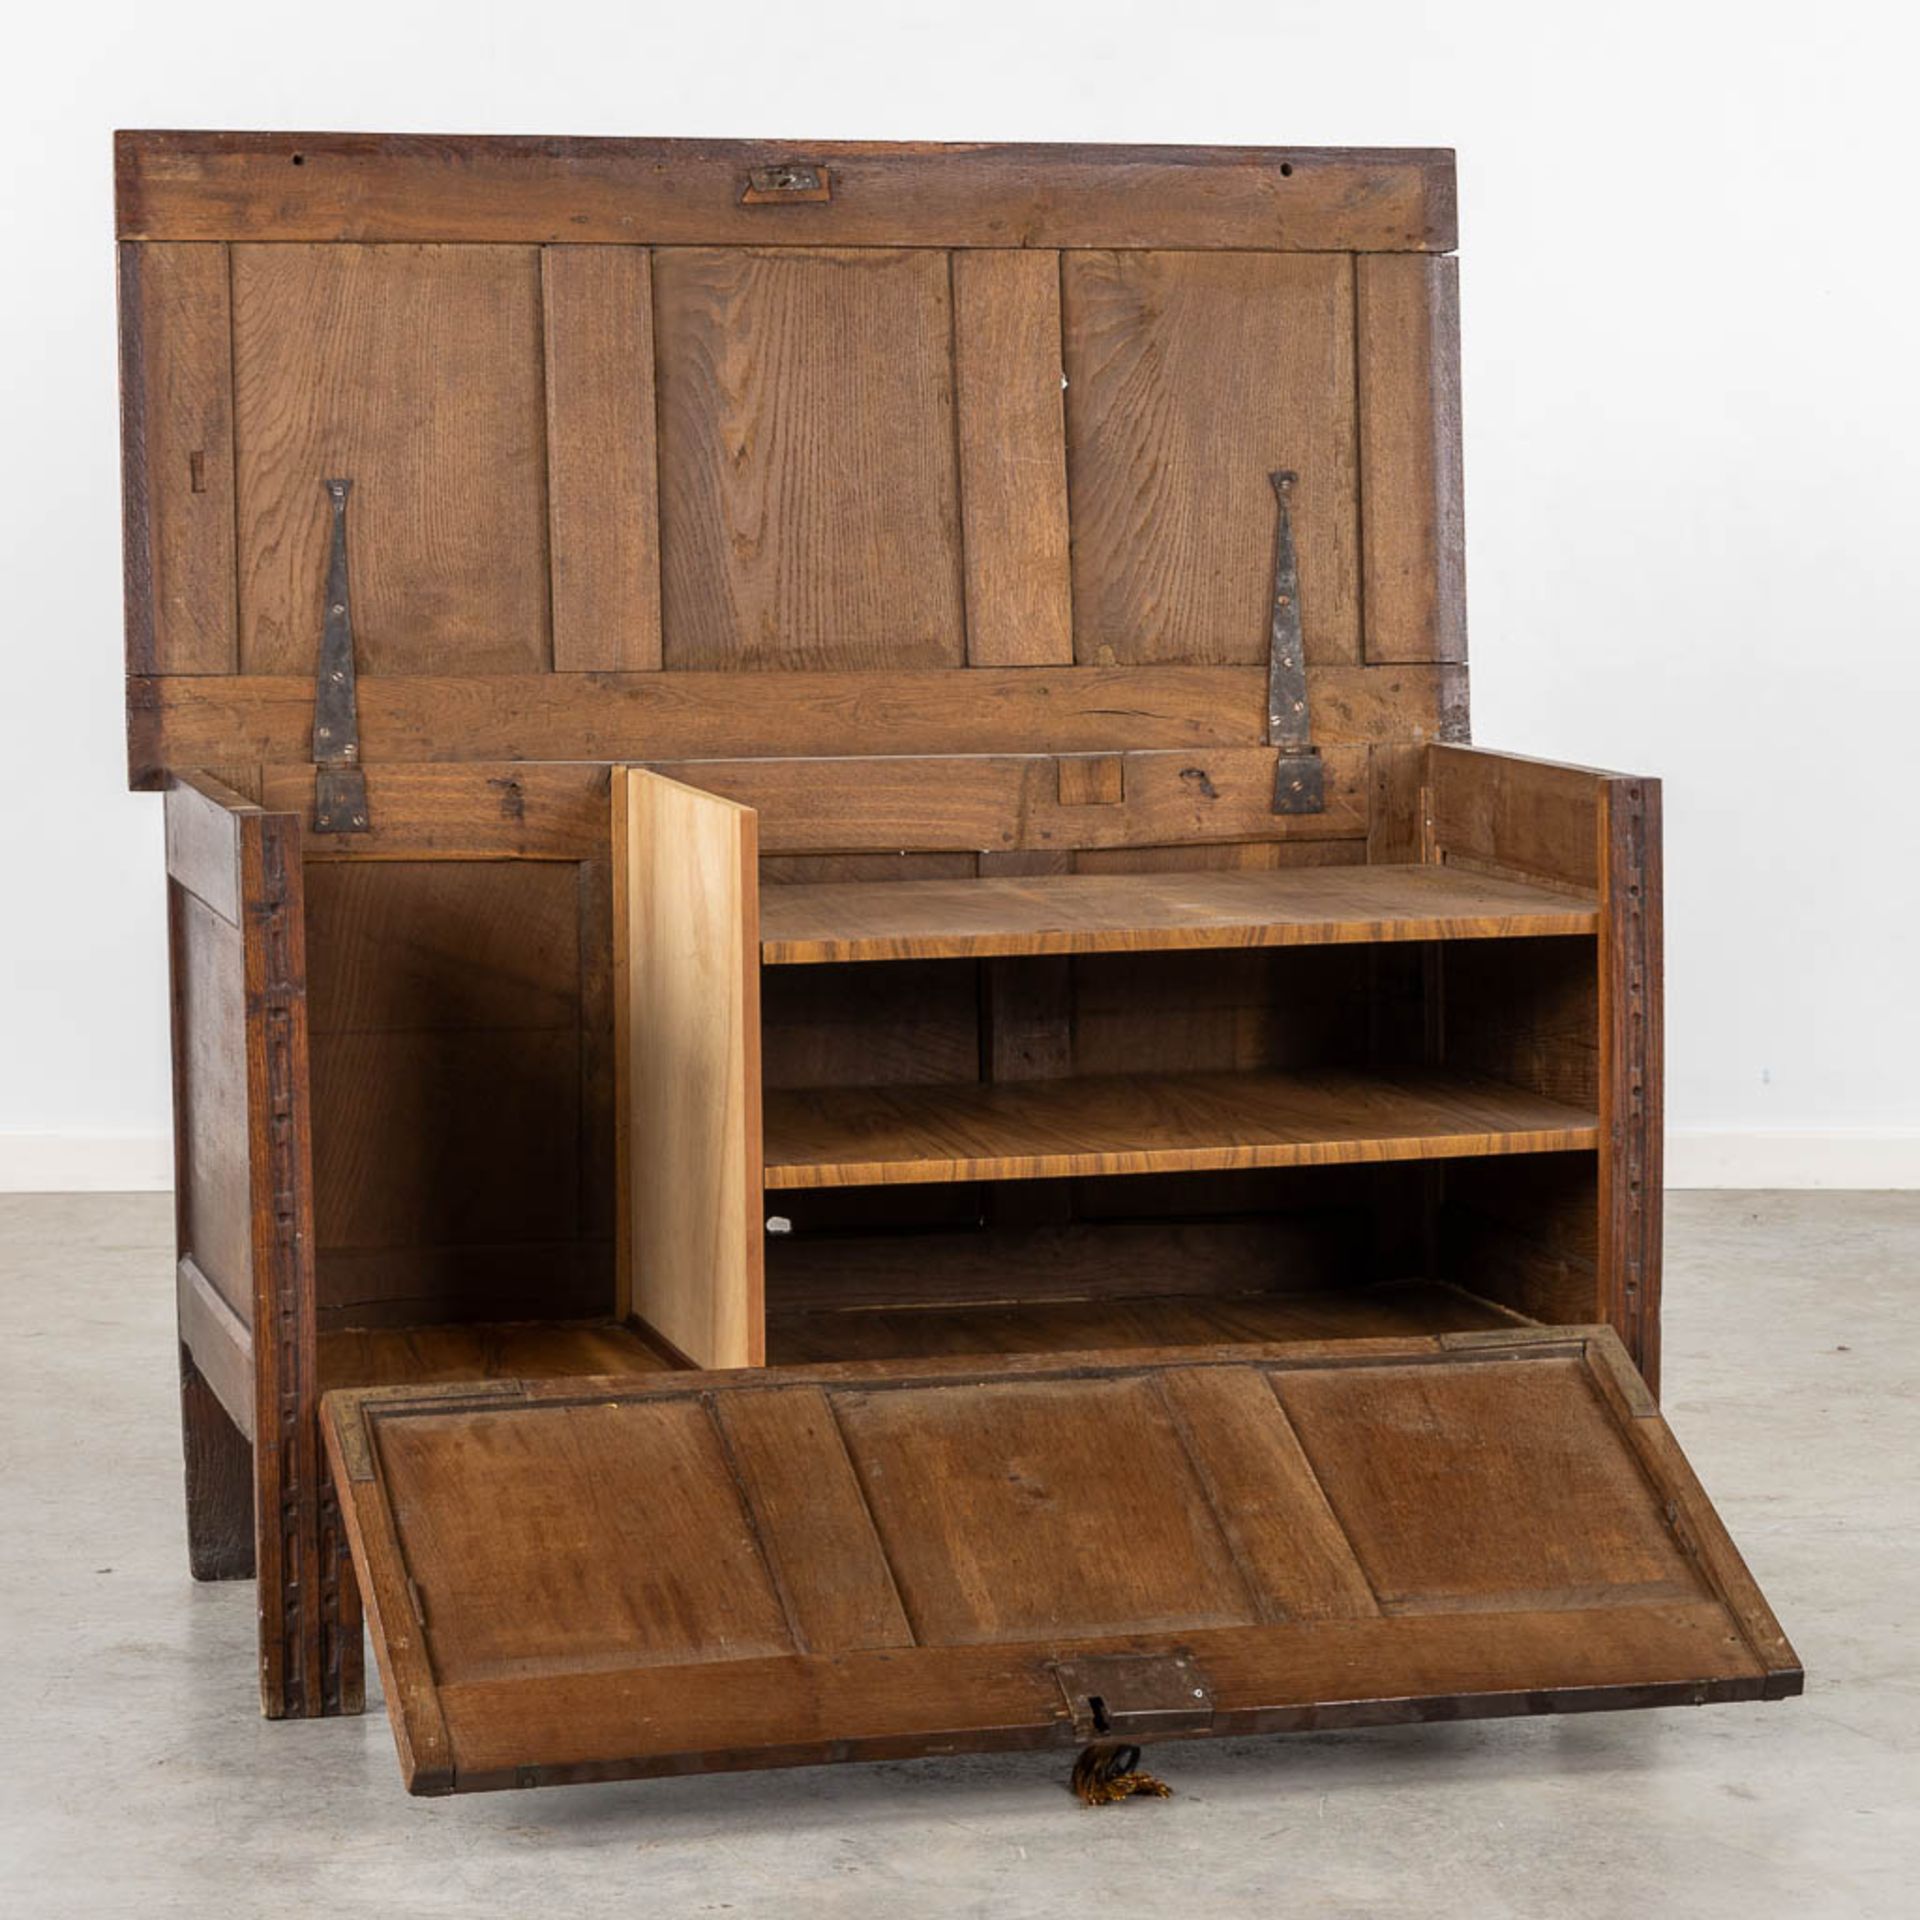 A chest with wood-sculptured panels. 19th C. (L:56 x W:120 x H:72 cm) - Image 4 of 11